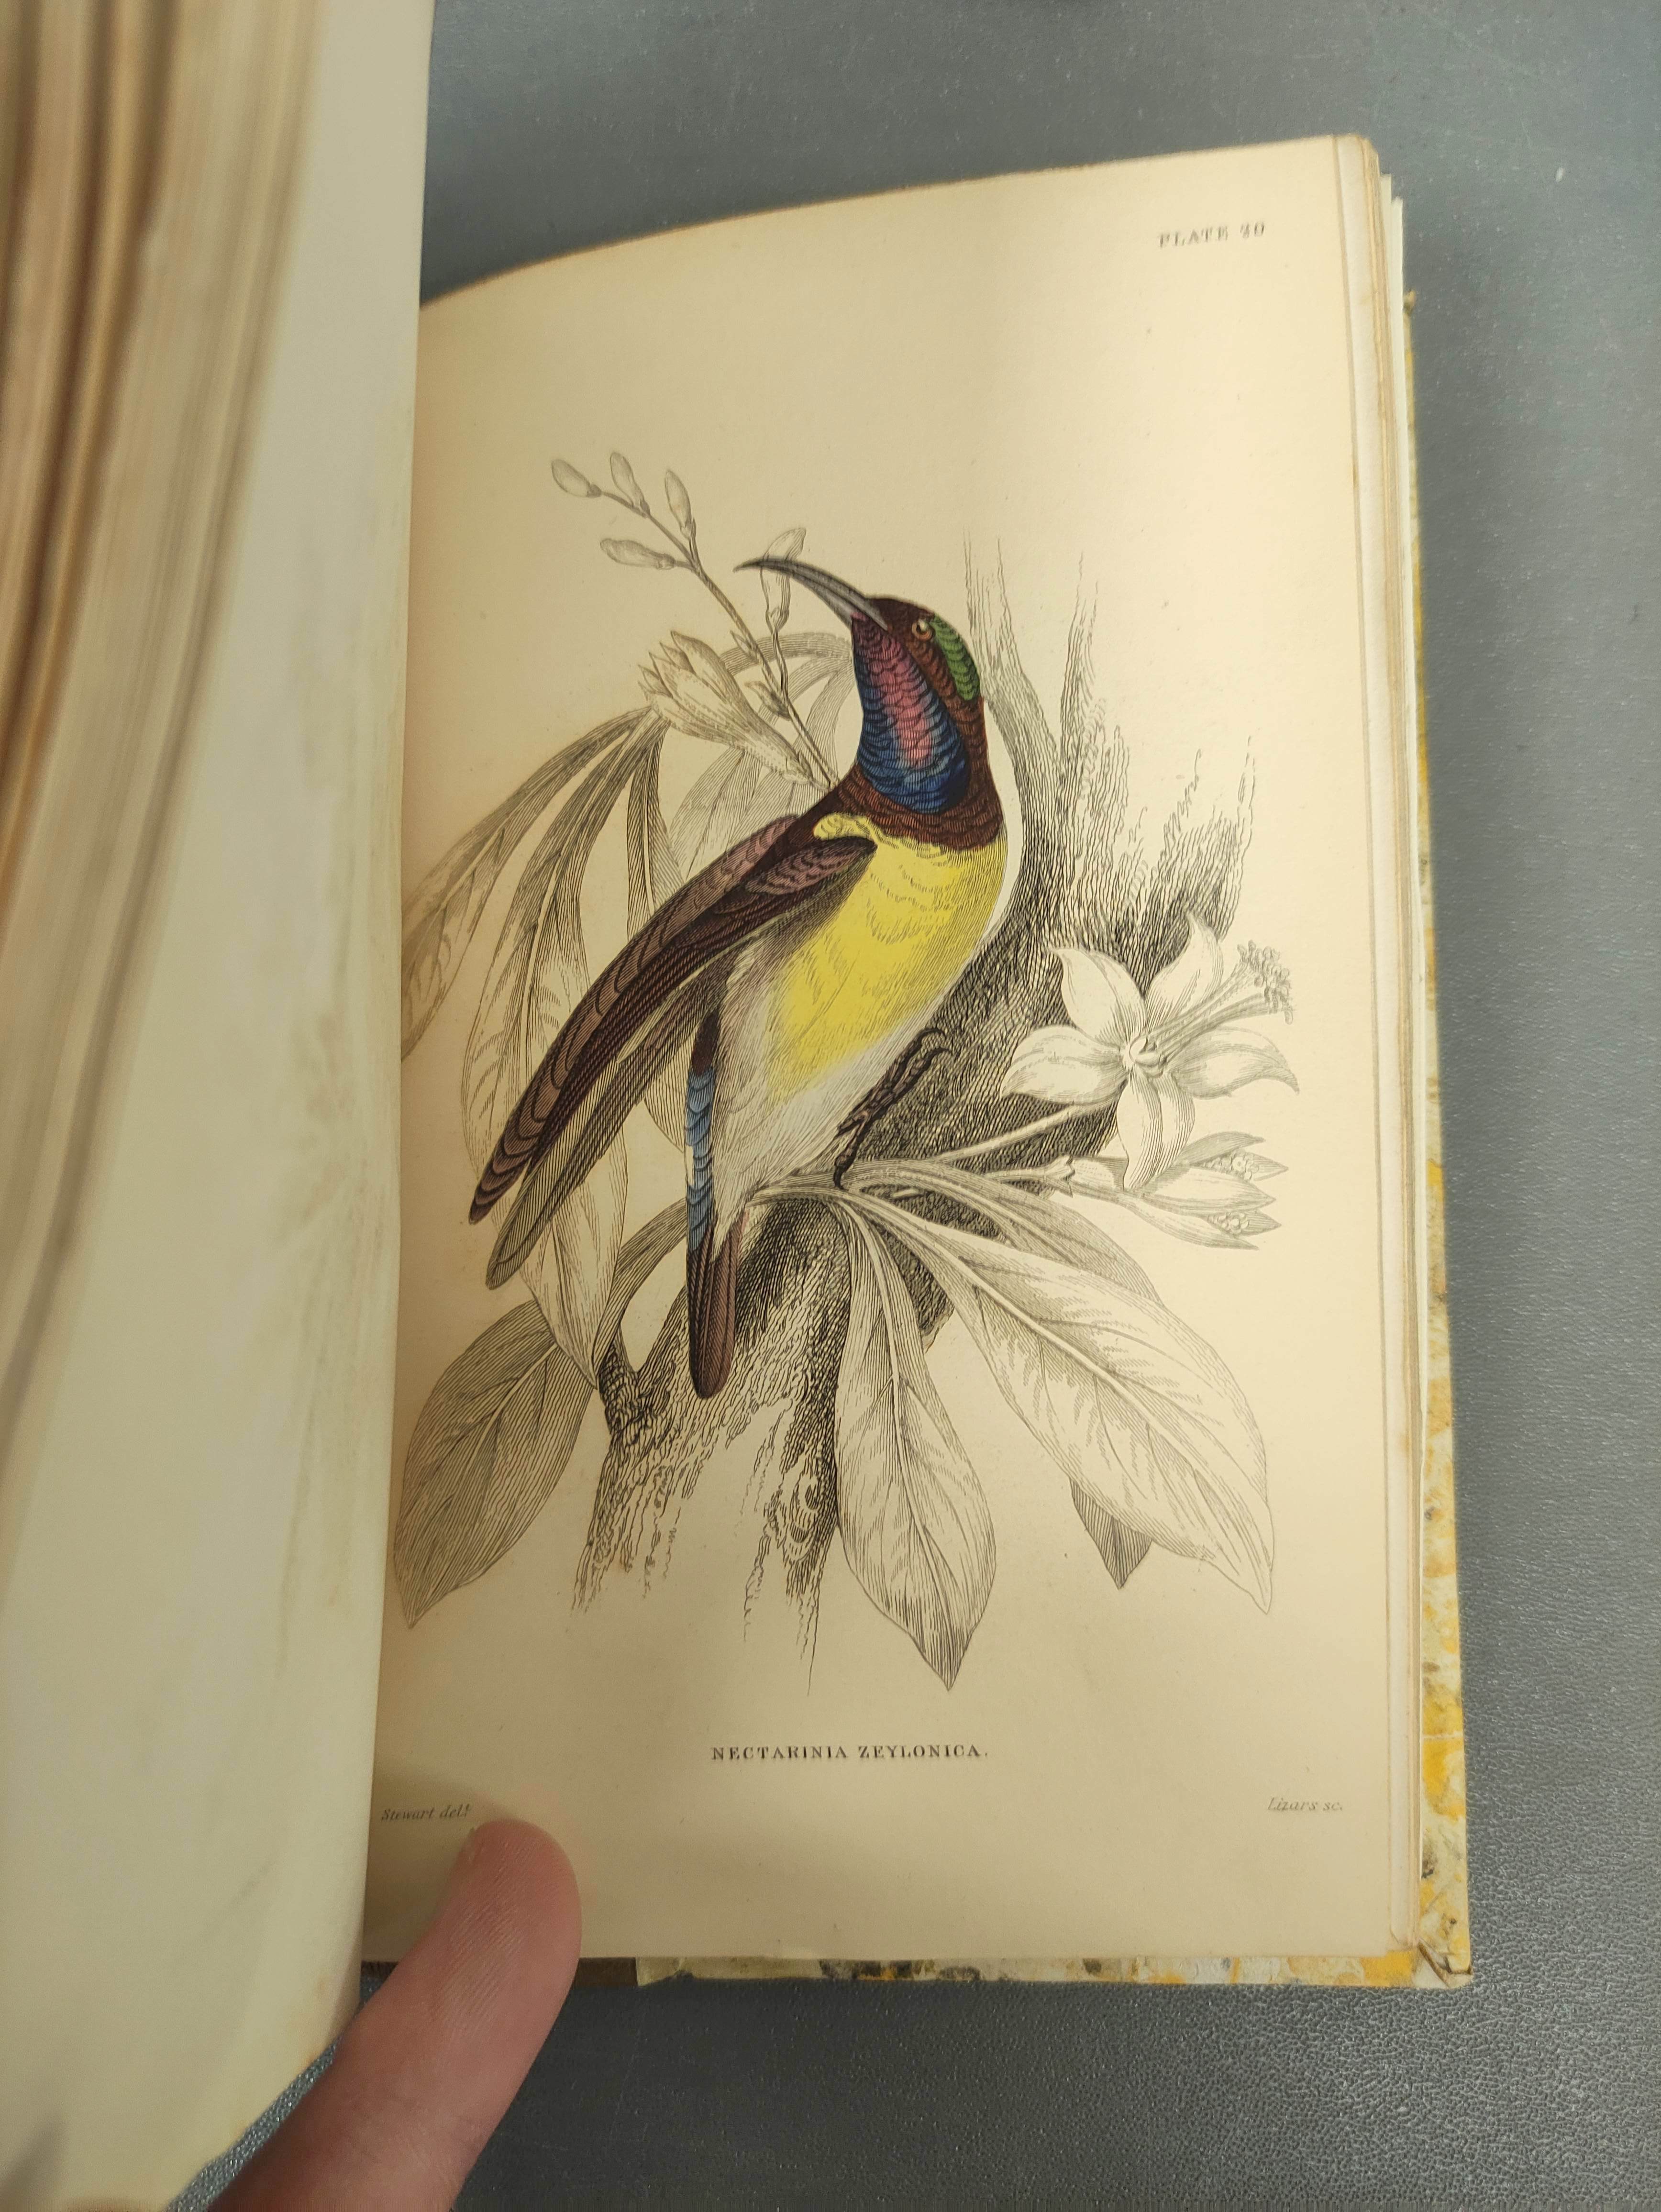 JARDINE SIR WILLIAM.  The Naturalist's Library. Ornithology vols. 1 & 2 re. Humming Birds. Eng. - Image 12 of 16